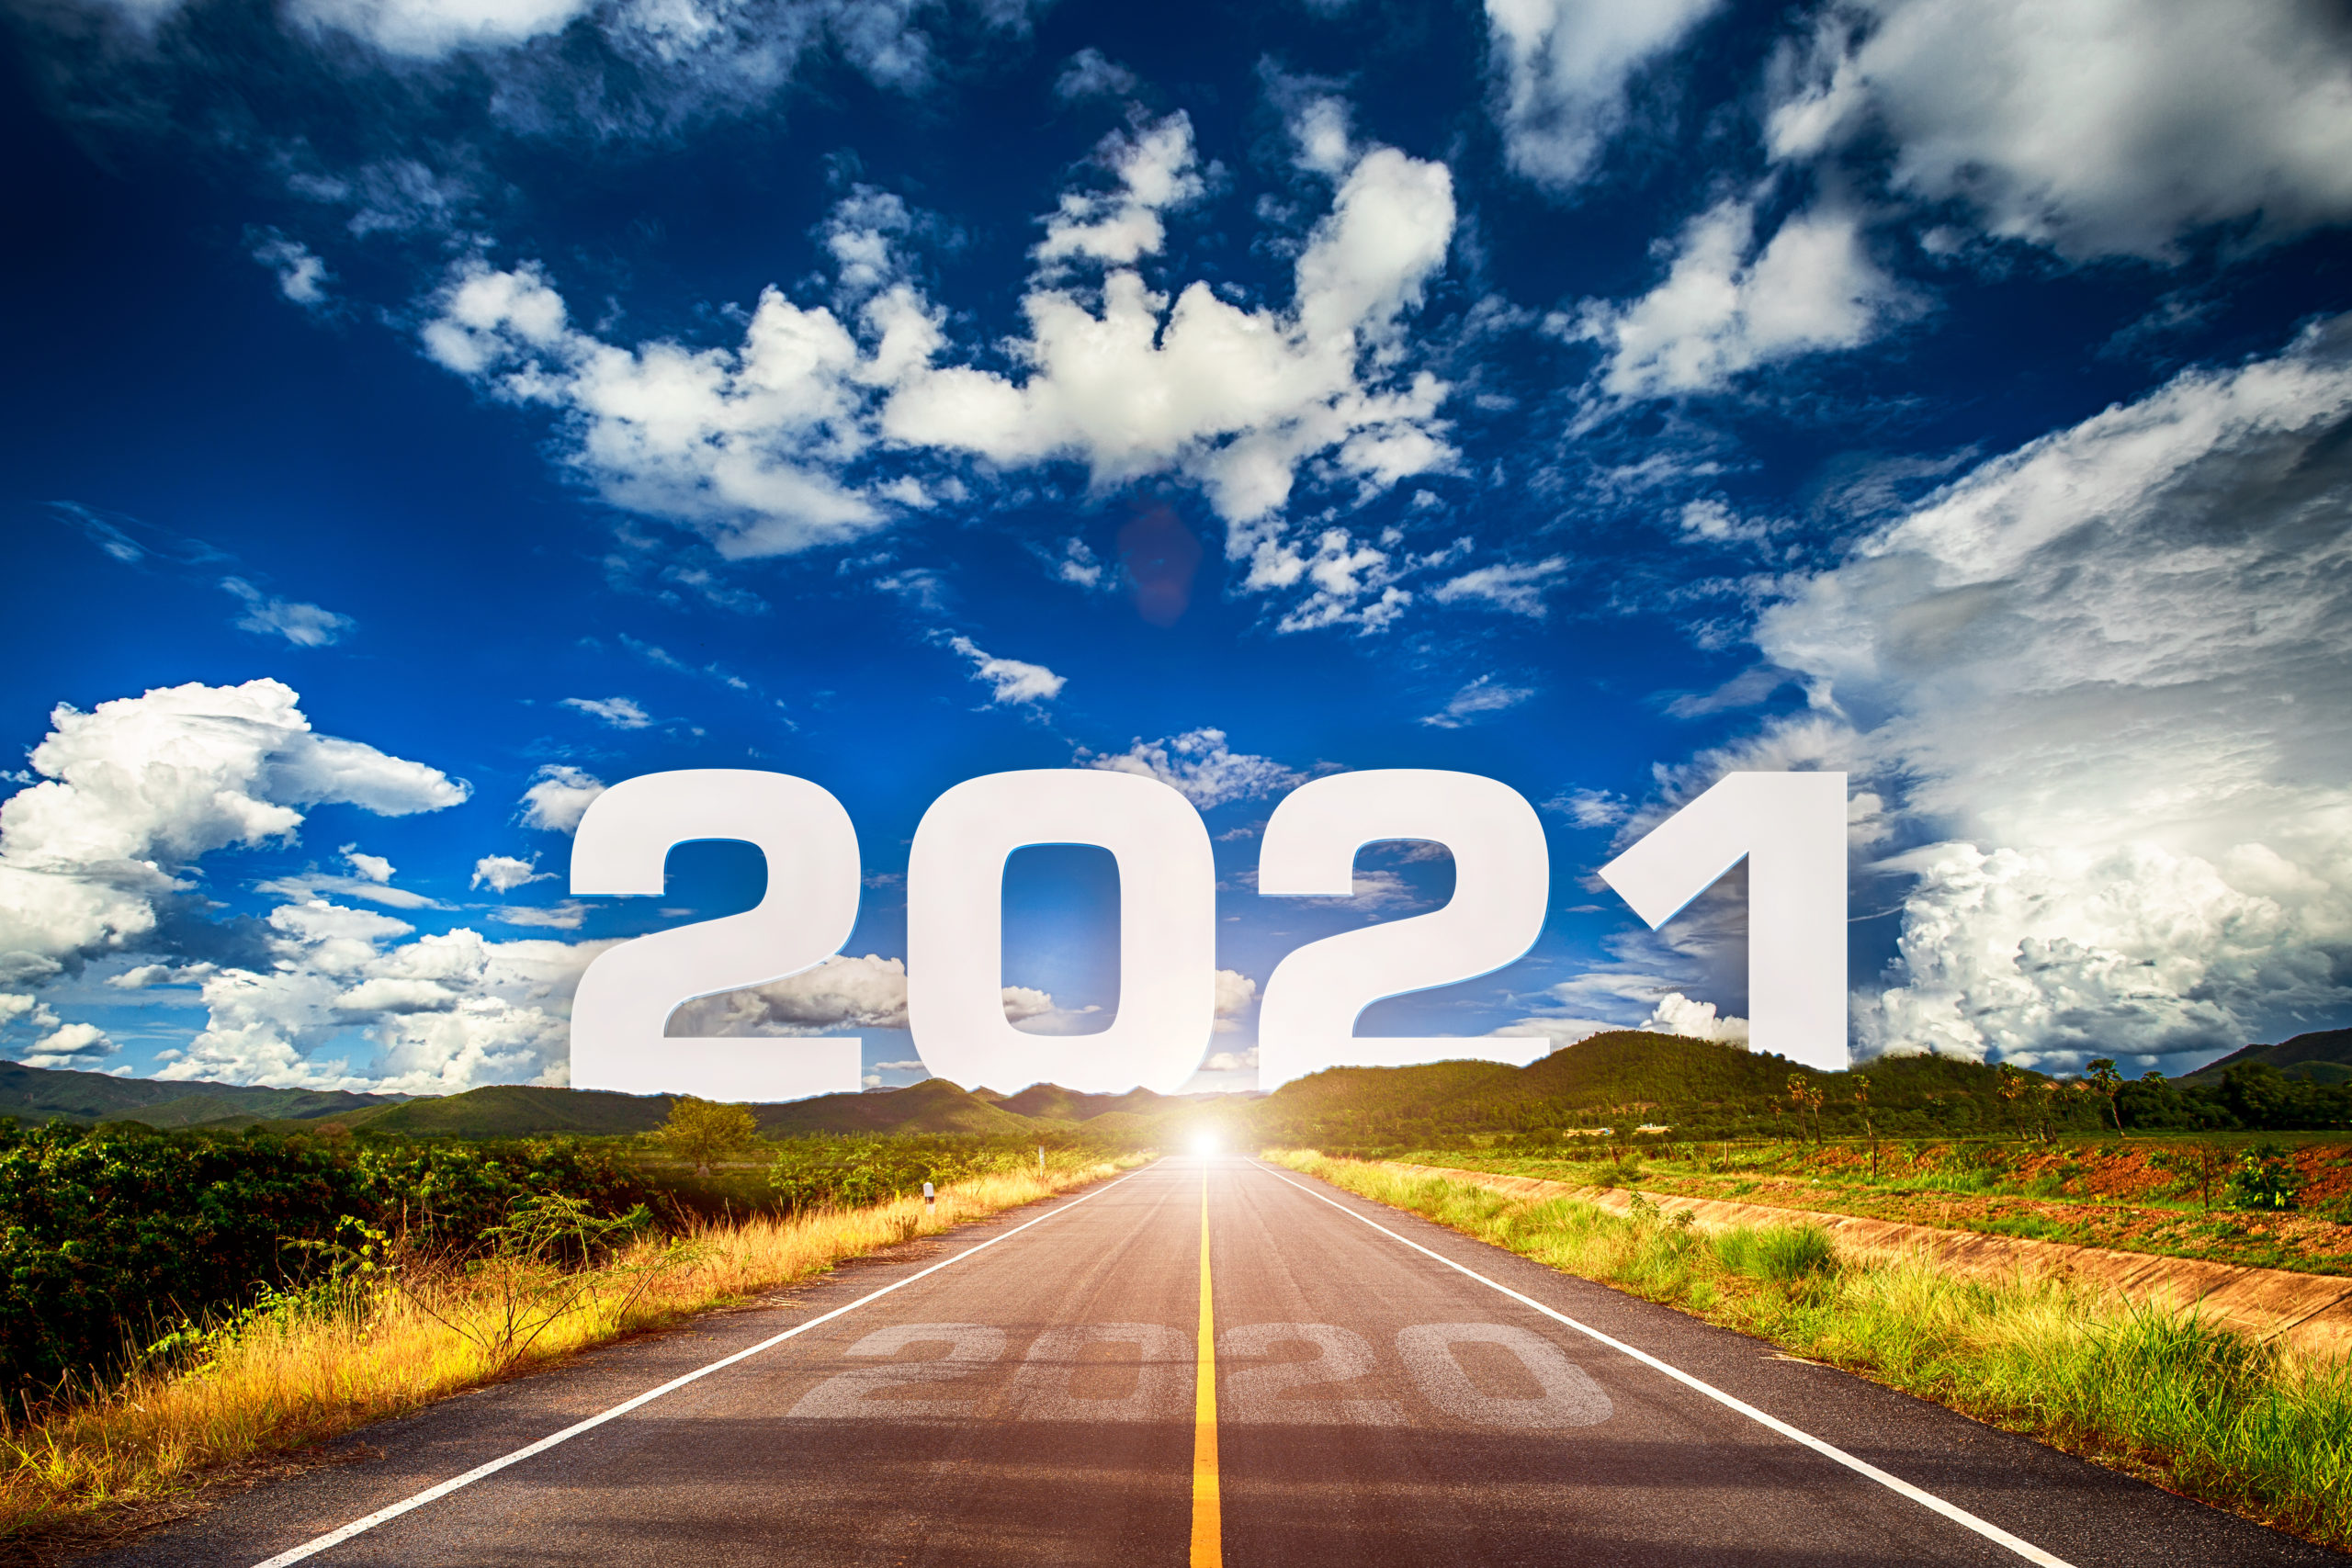 The Word 2021 Behind The Mountain Of Empty Asphalt Road At Golden Sunset And Beautiful Blue Sky. Concept For Vision Year 2021. By Atk Work Scaled